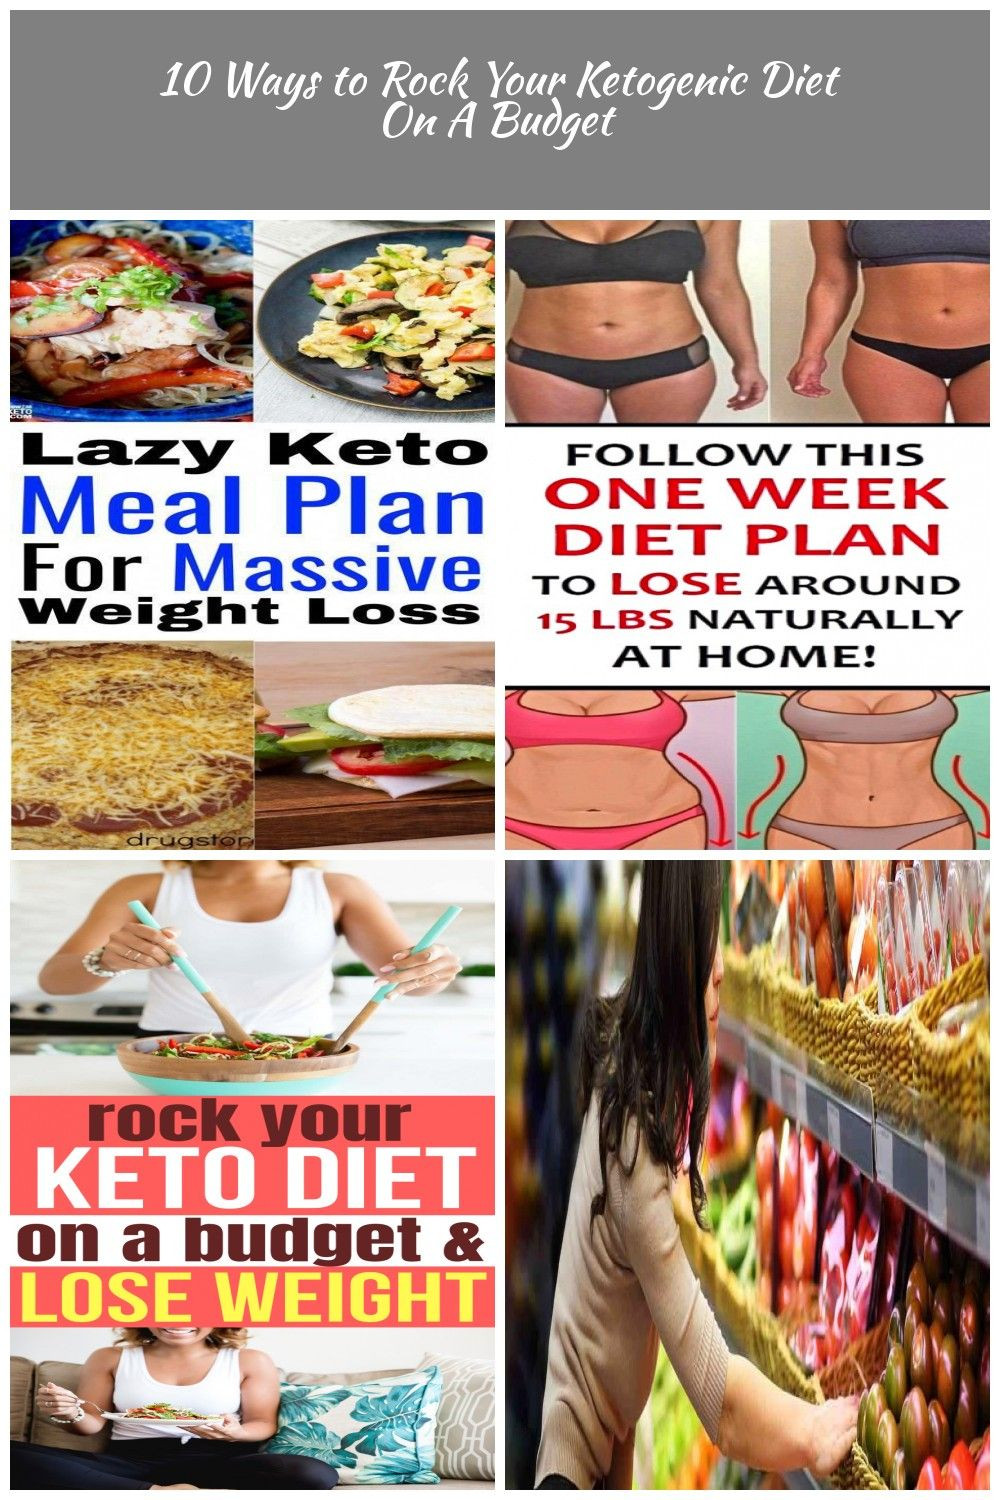 Keto For Beginners Meal Plan On A Budget
 Keto Diet Plan For Beginners A Bud